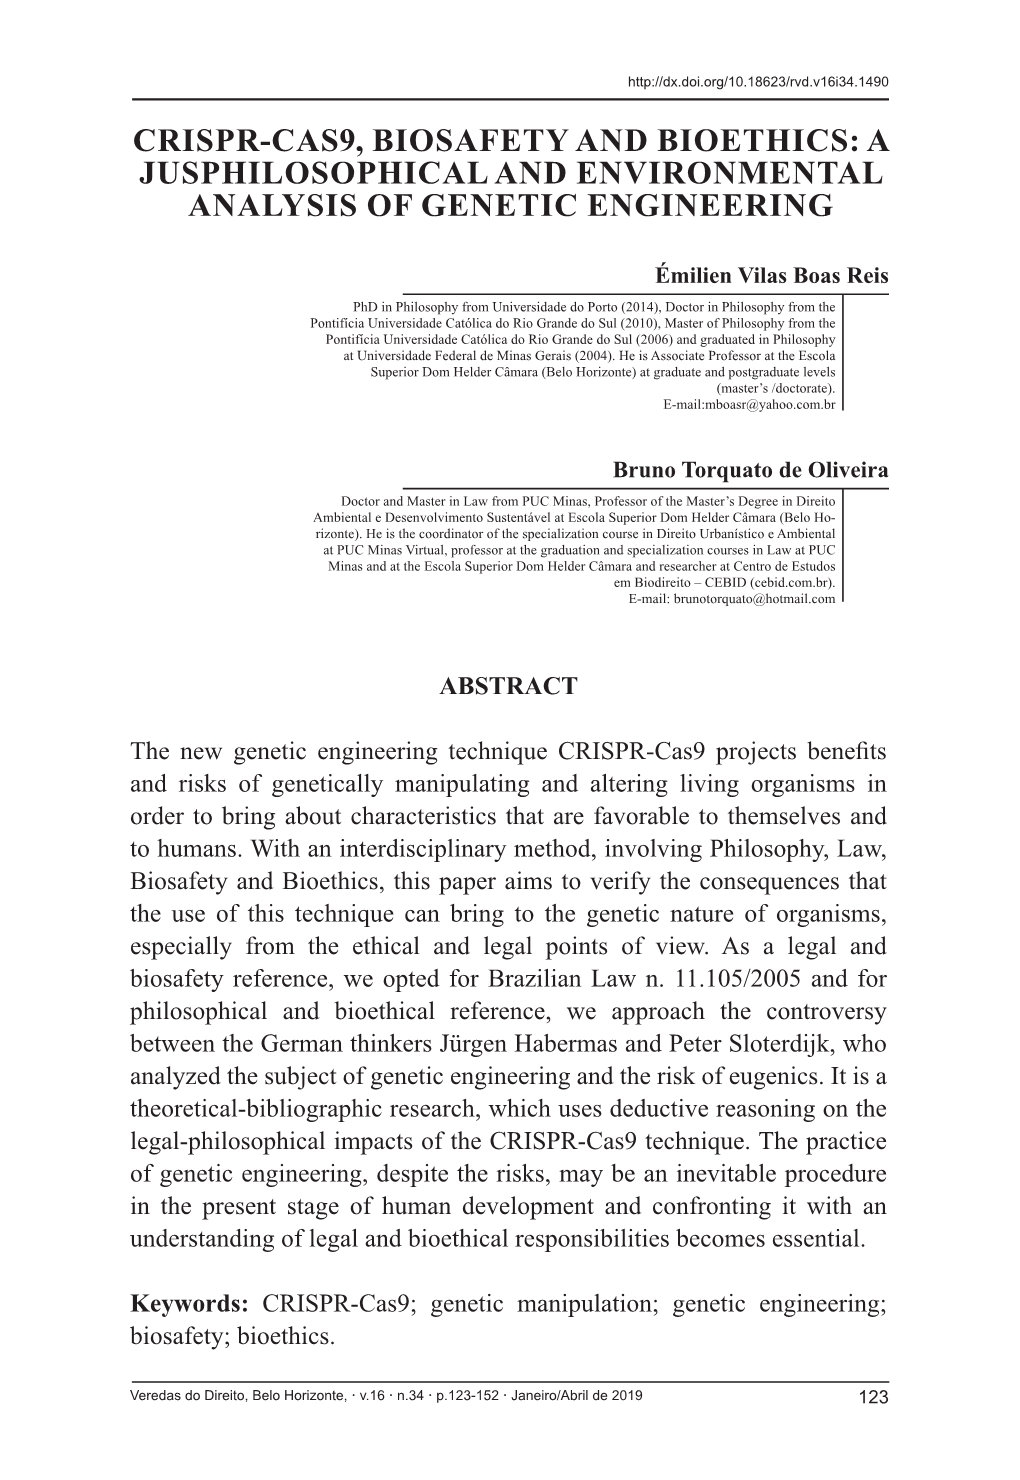 Crispr-Cas9, Biosafety and Bioethics: a Jusphilosophical and Environmental Analysis of Genetic Engineering